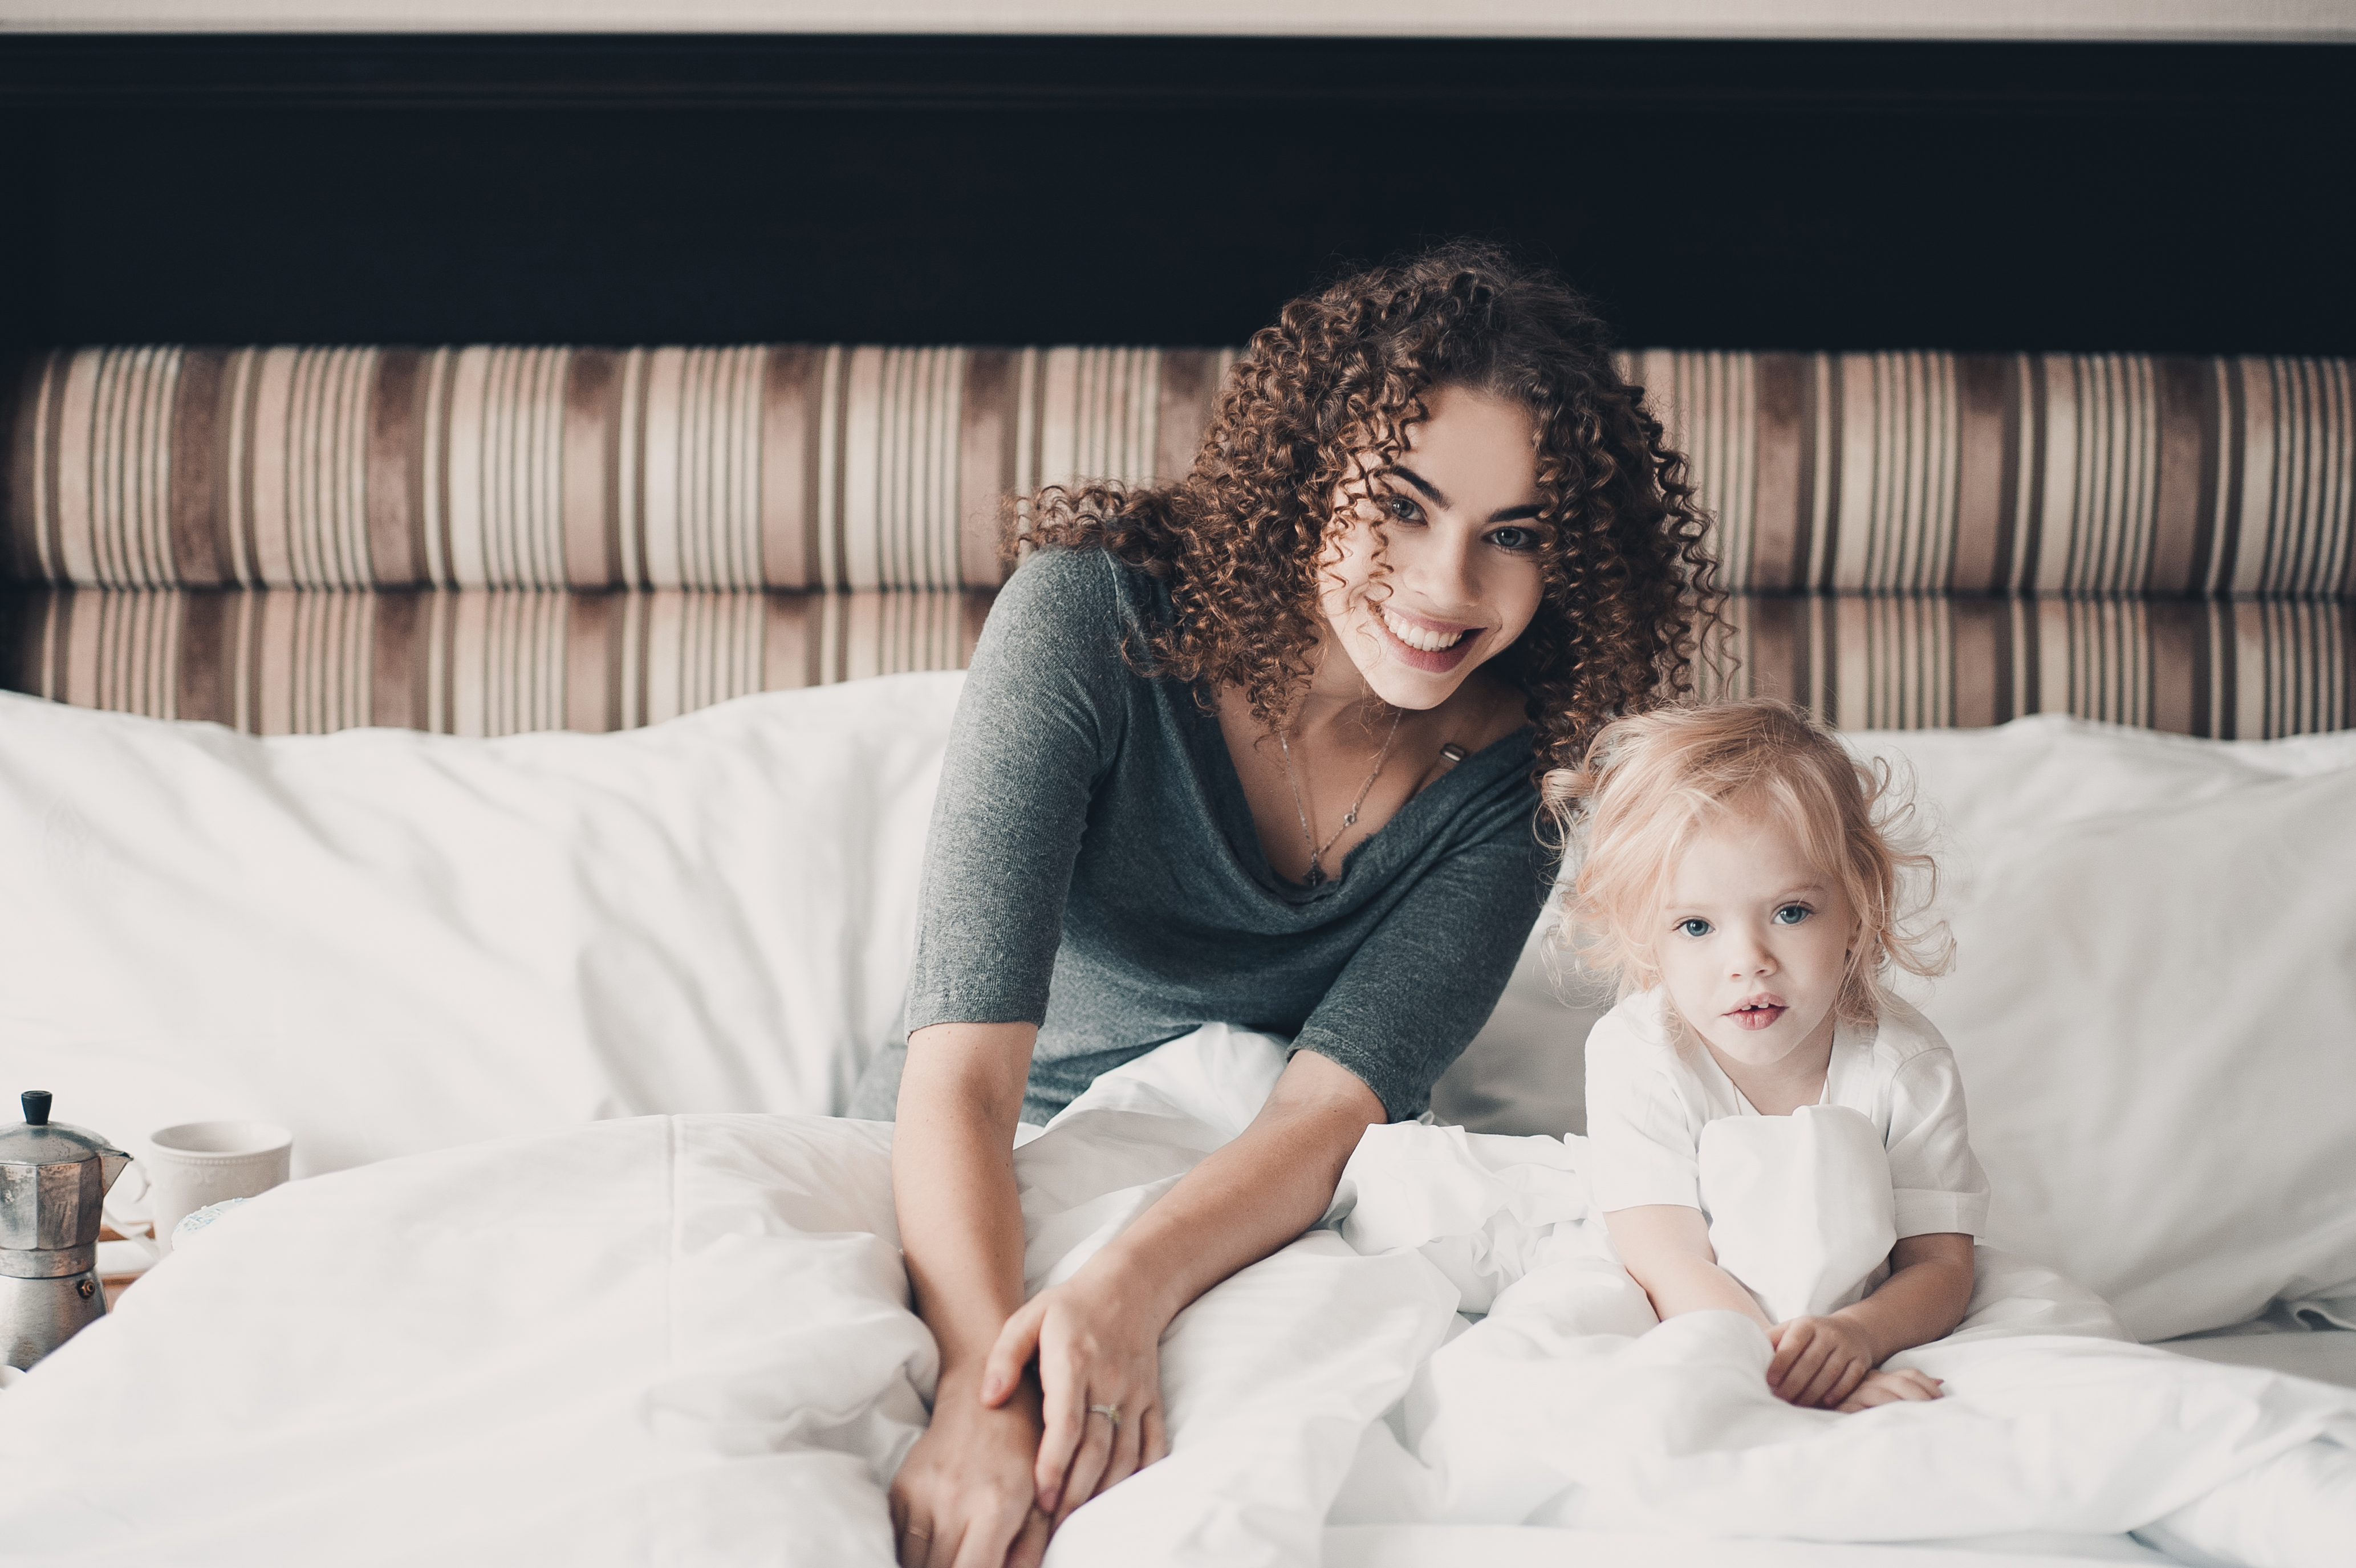 Woman in gray shirt holding baby on bed